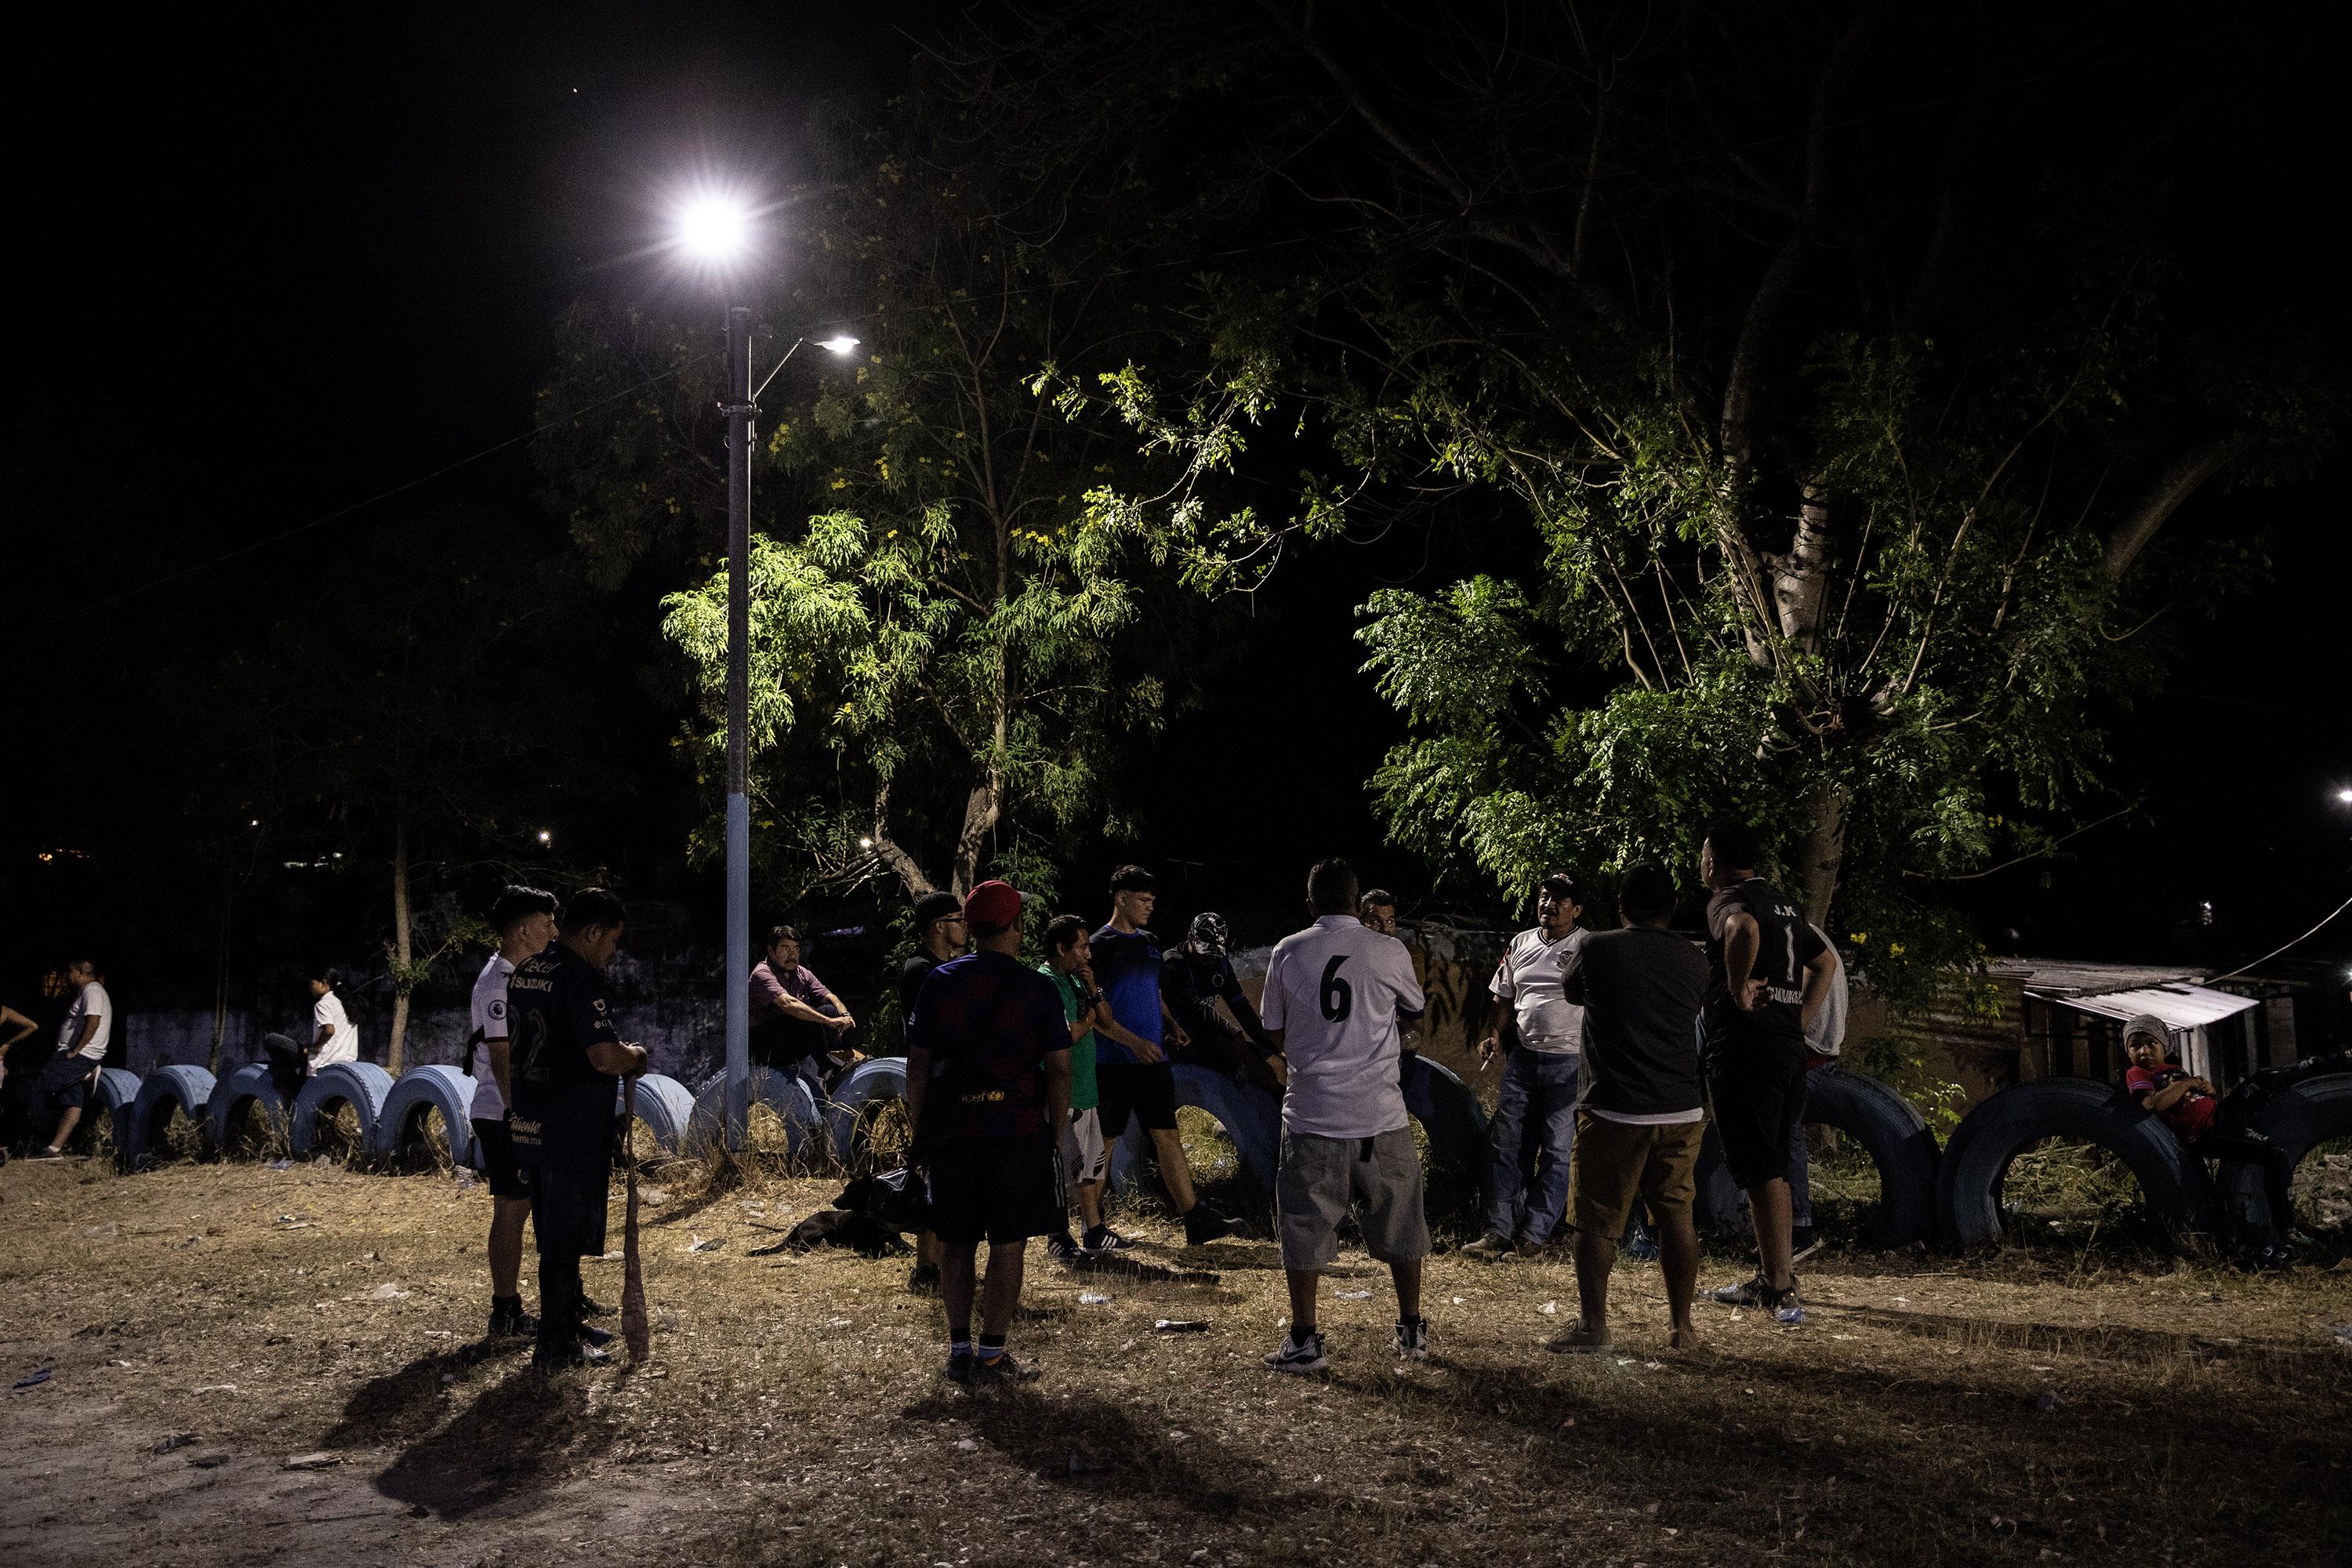 Standing under the glow of a streetlamp, the Las Cañas sports committee discusses team agreements for the soccer tournament they are organizing to unite youth from both sides of their divided community. Photo: Carlos Barrera/El Faro